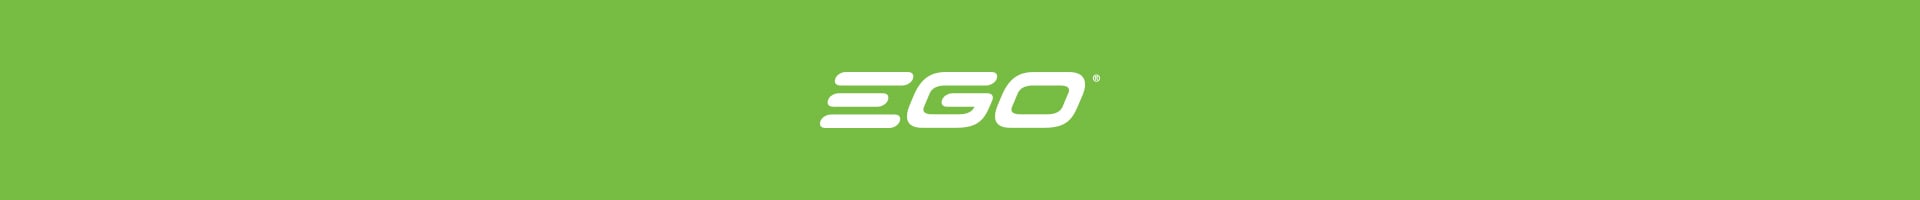 Save up to $100 on Select EGO Outdoor Power Equipment